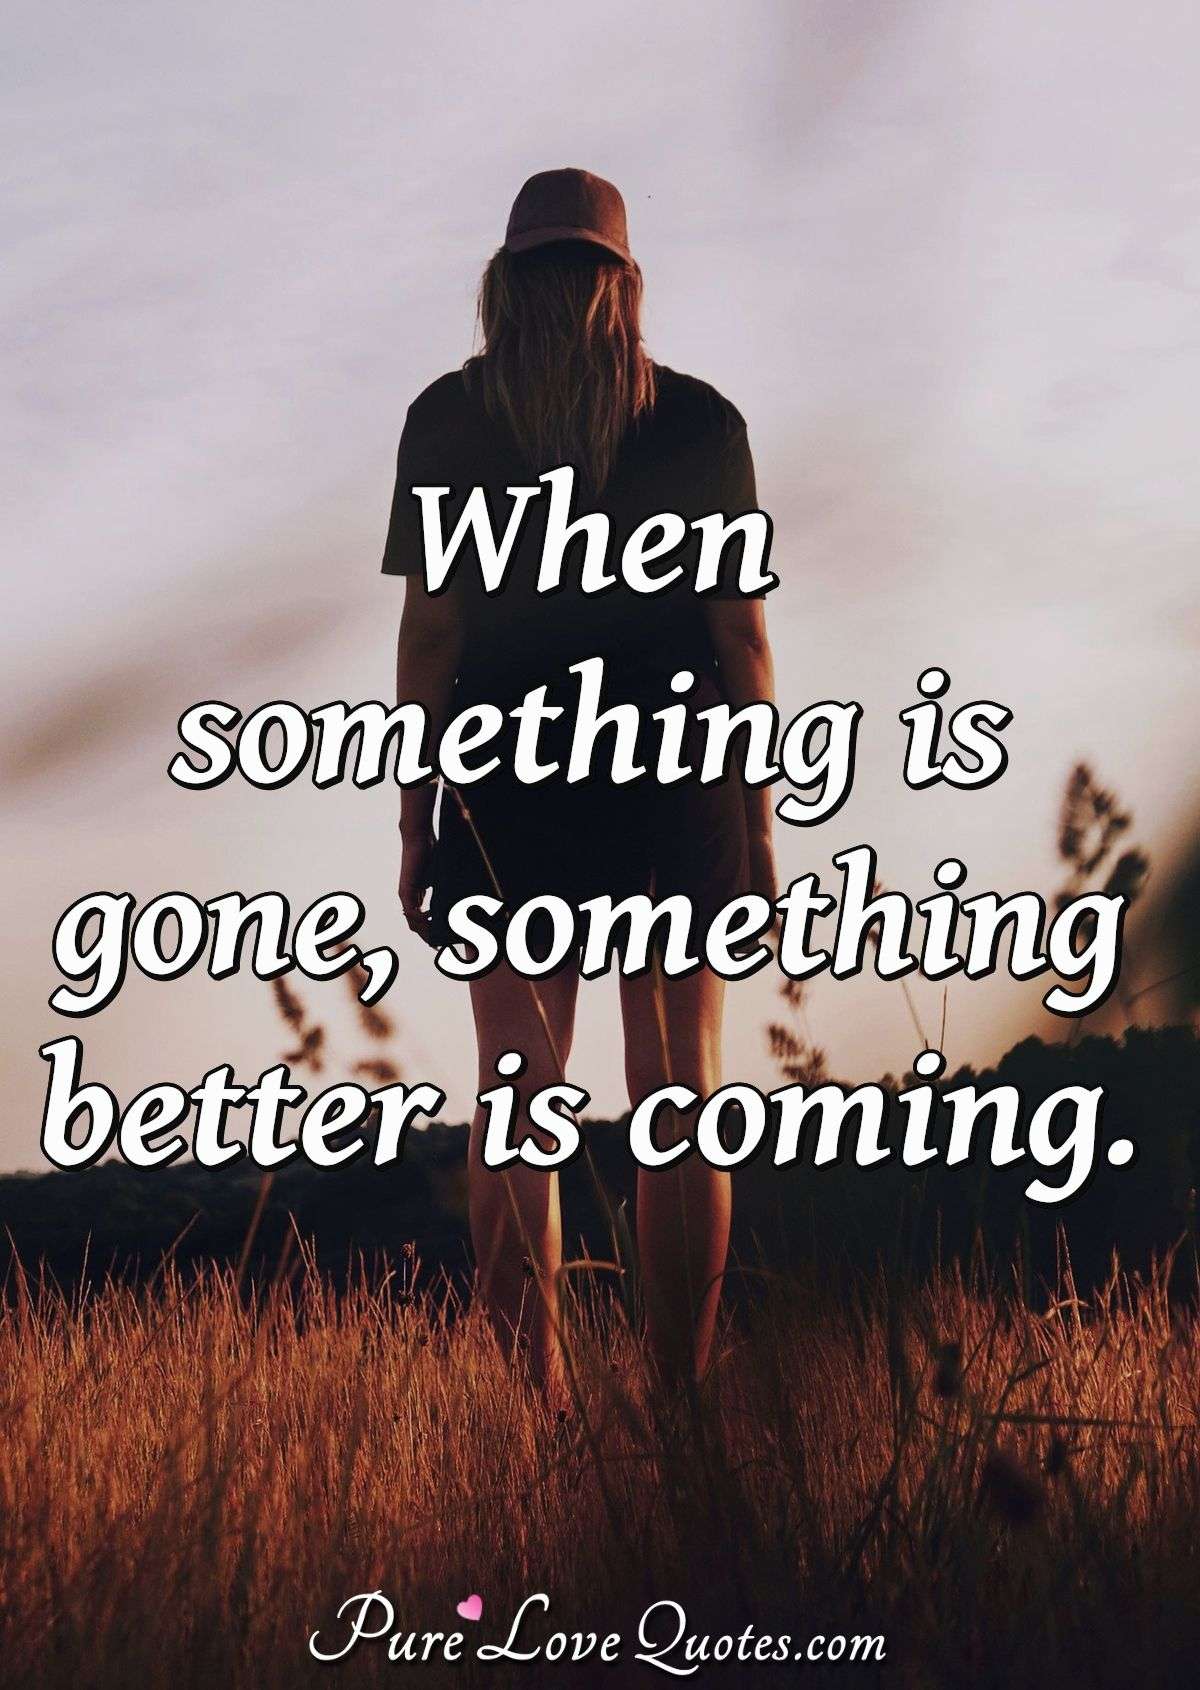 When something is gone, something better is coming. - Anonymous